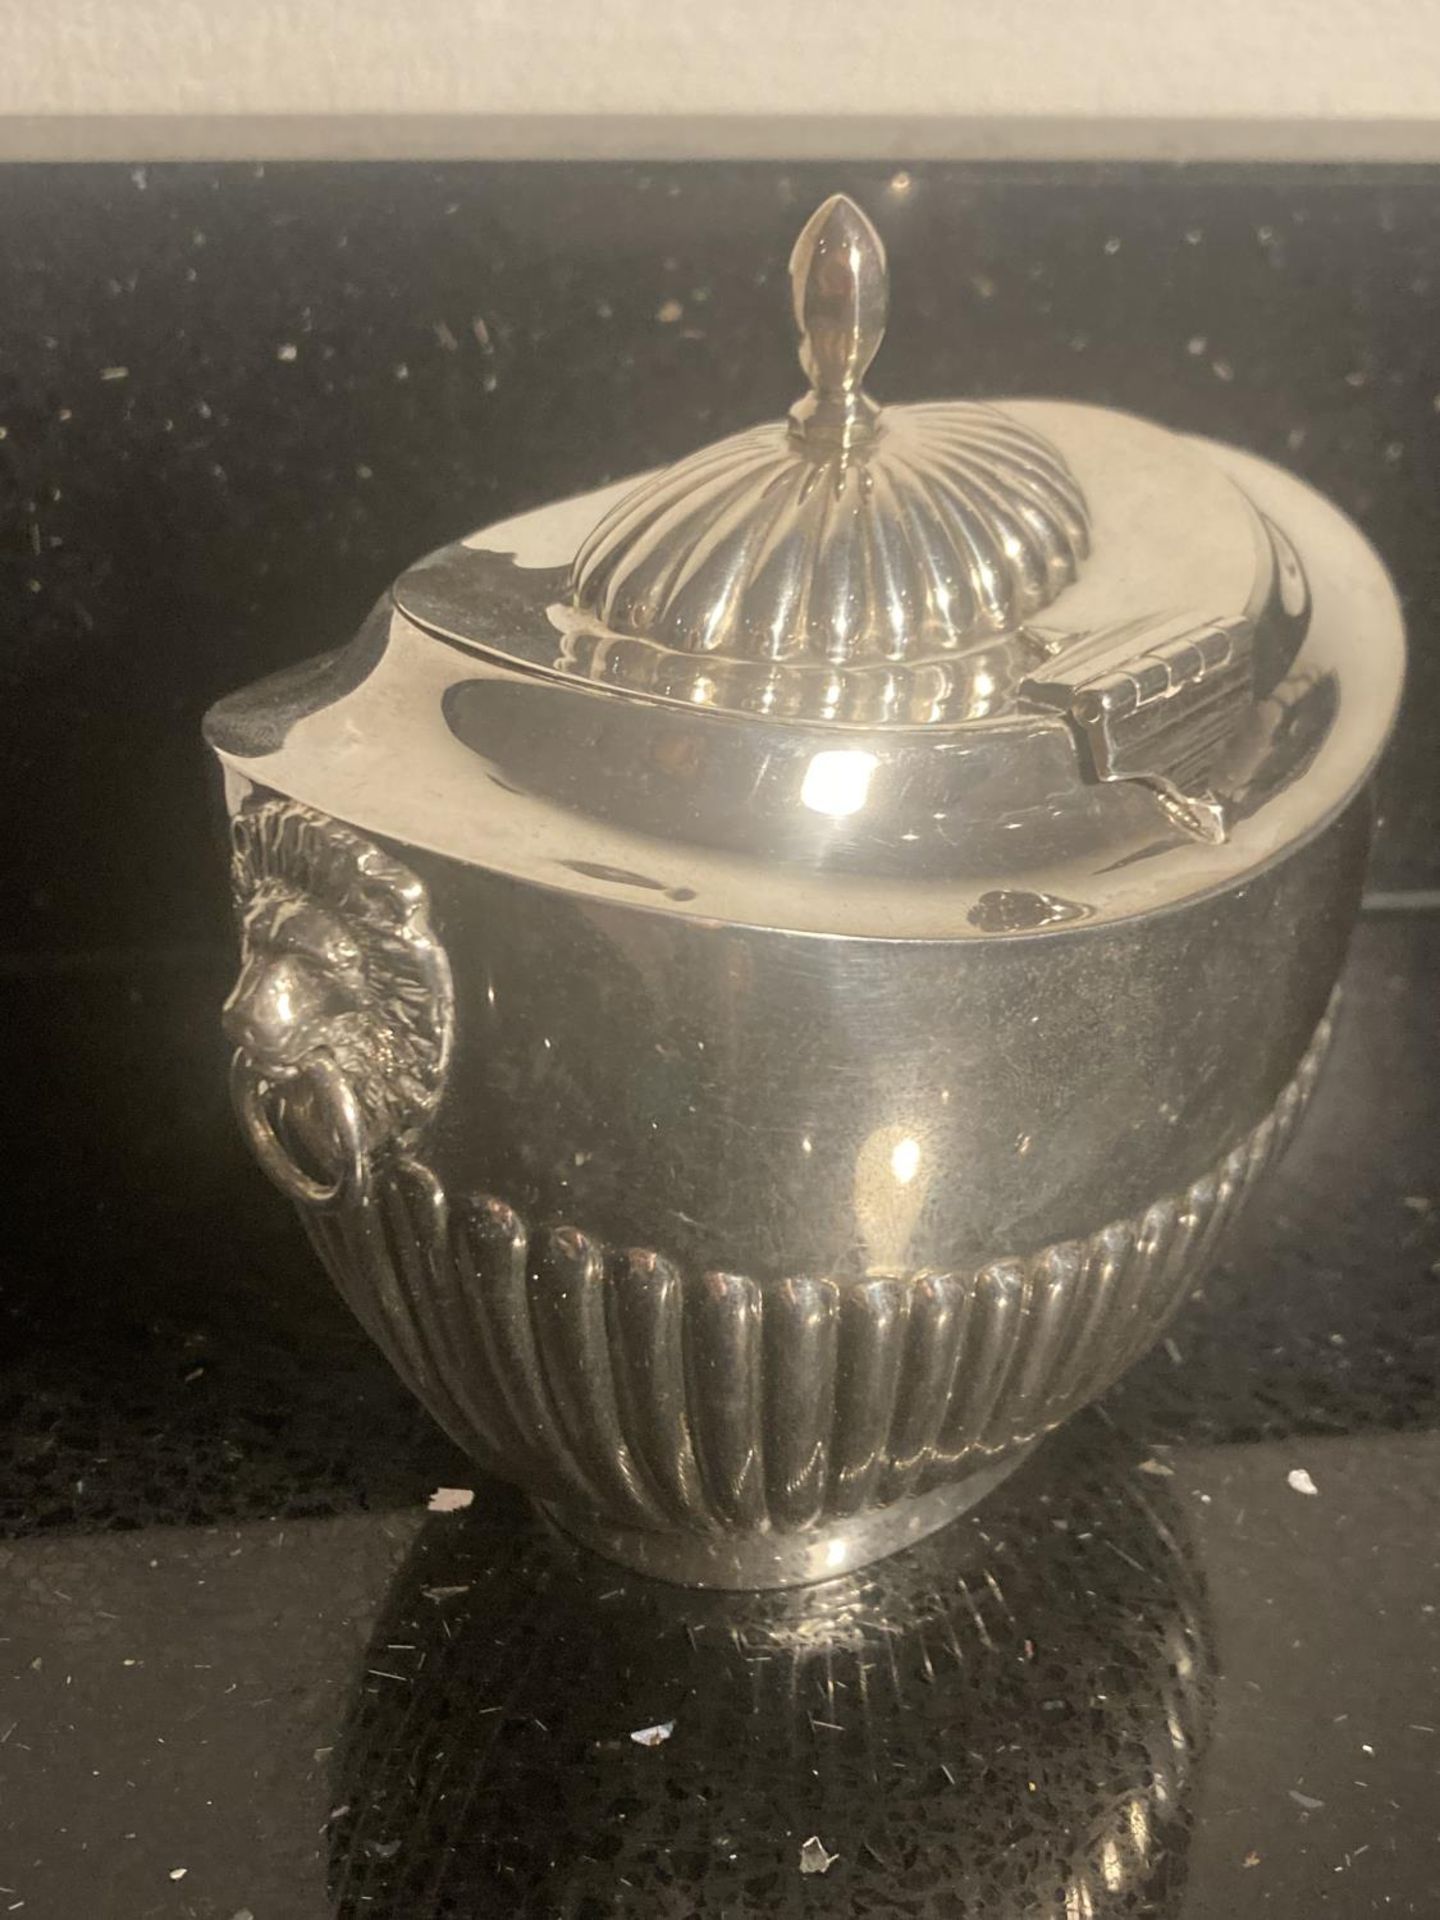 A HALLMARKED BIRMINGHAM SILVER LOOSE TEA CADDY GROSS WEIGHT 210 GRAMS - Image 2 of 5